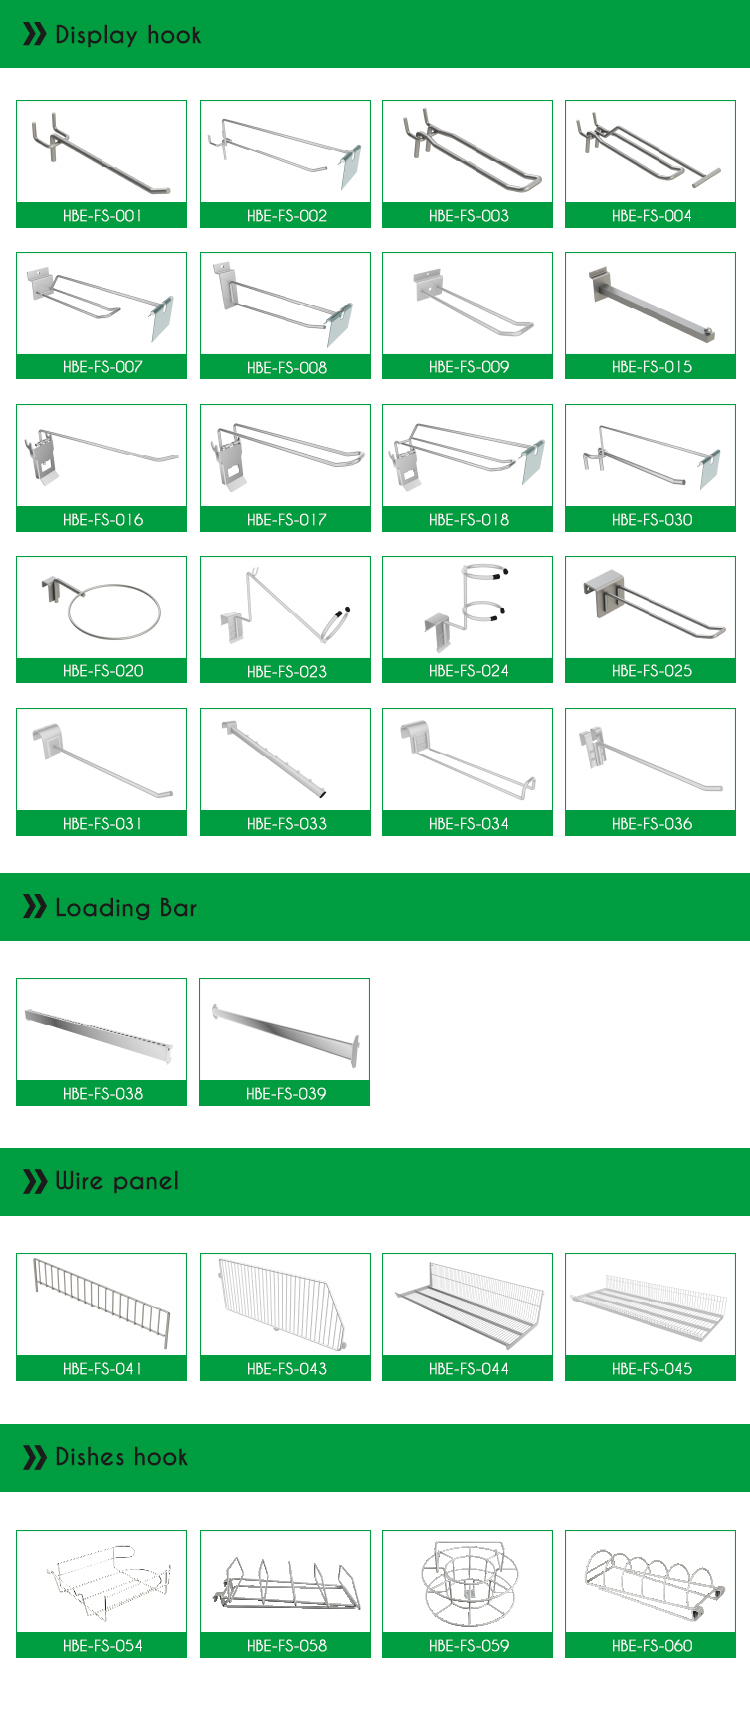 13 Years Supplier of Shop Fittings and Display Hooks